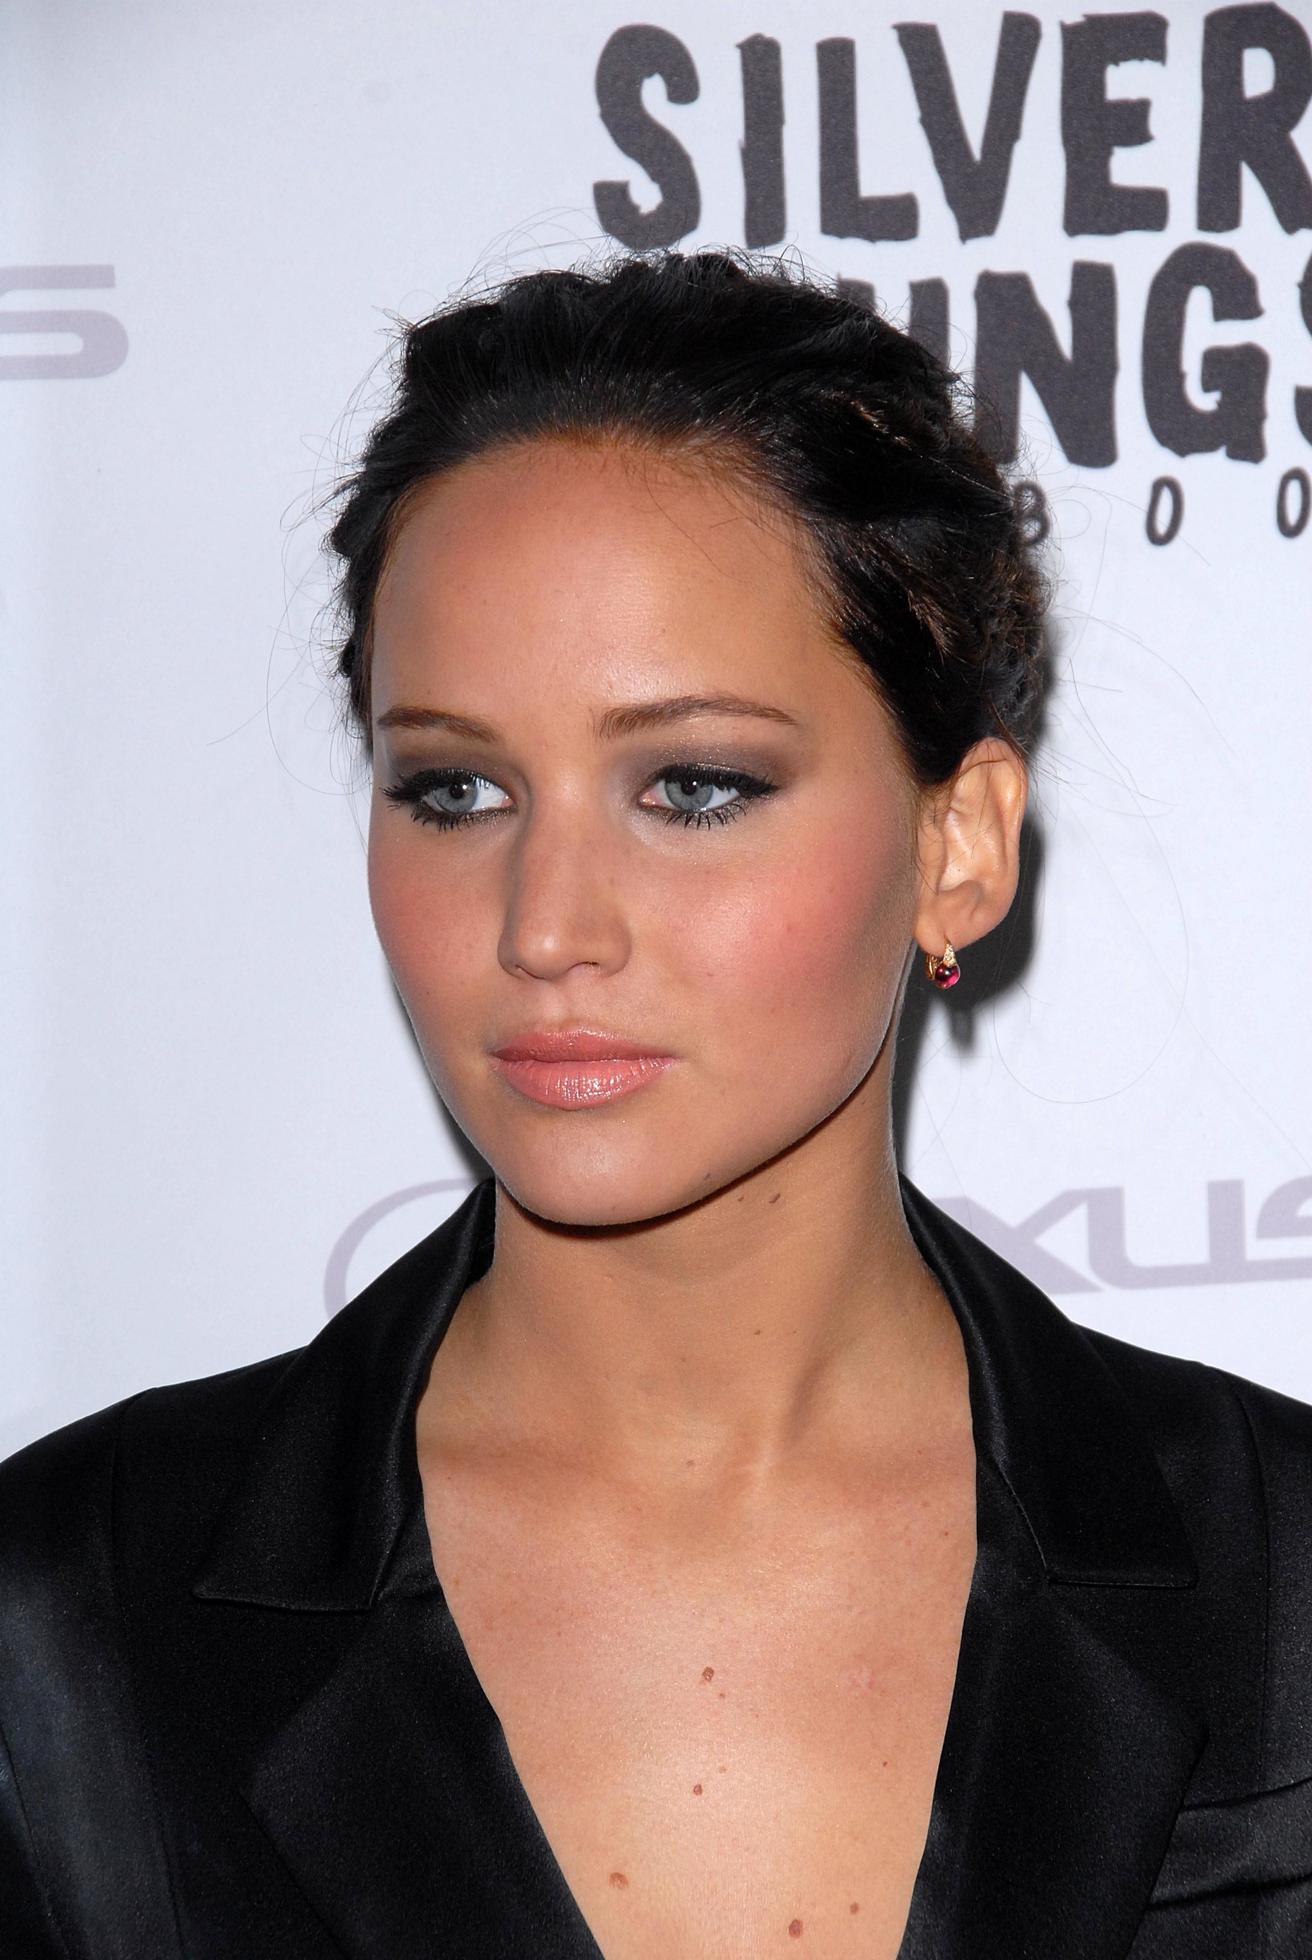 Jennifer Lawrence's hair was styled in a bun for the Silver Linings Playbook premiere in 2012. - Jennifer Lawrence